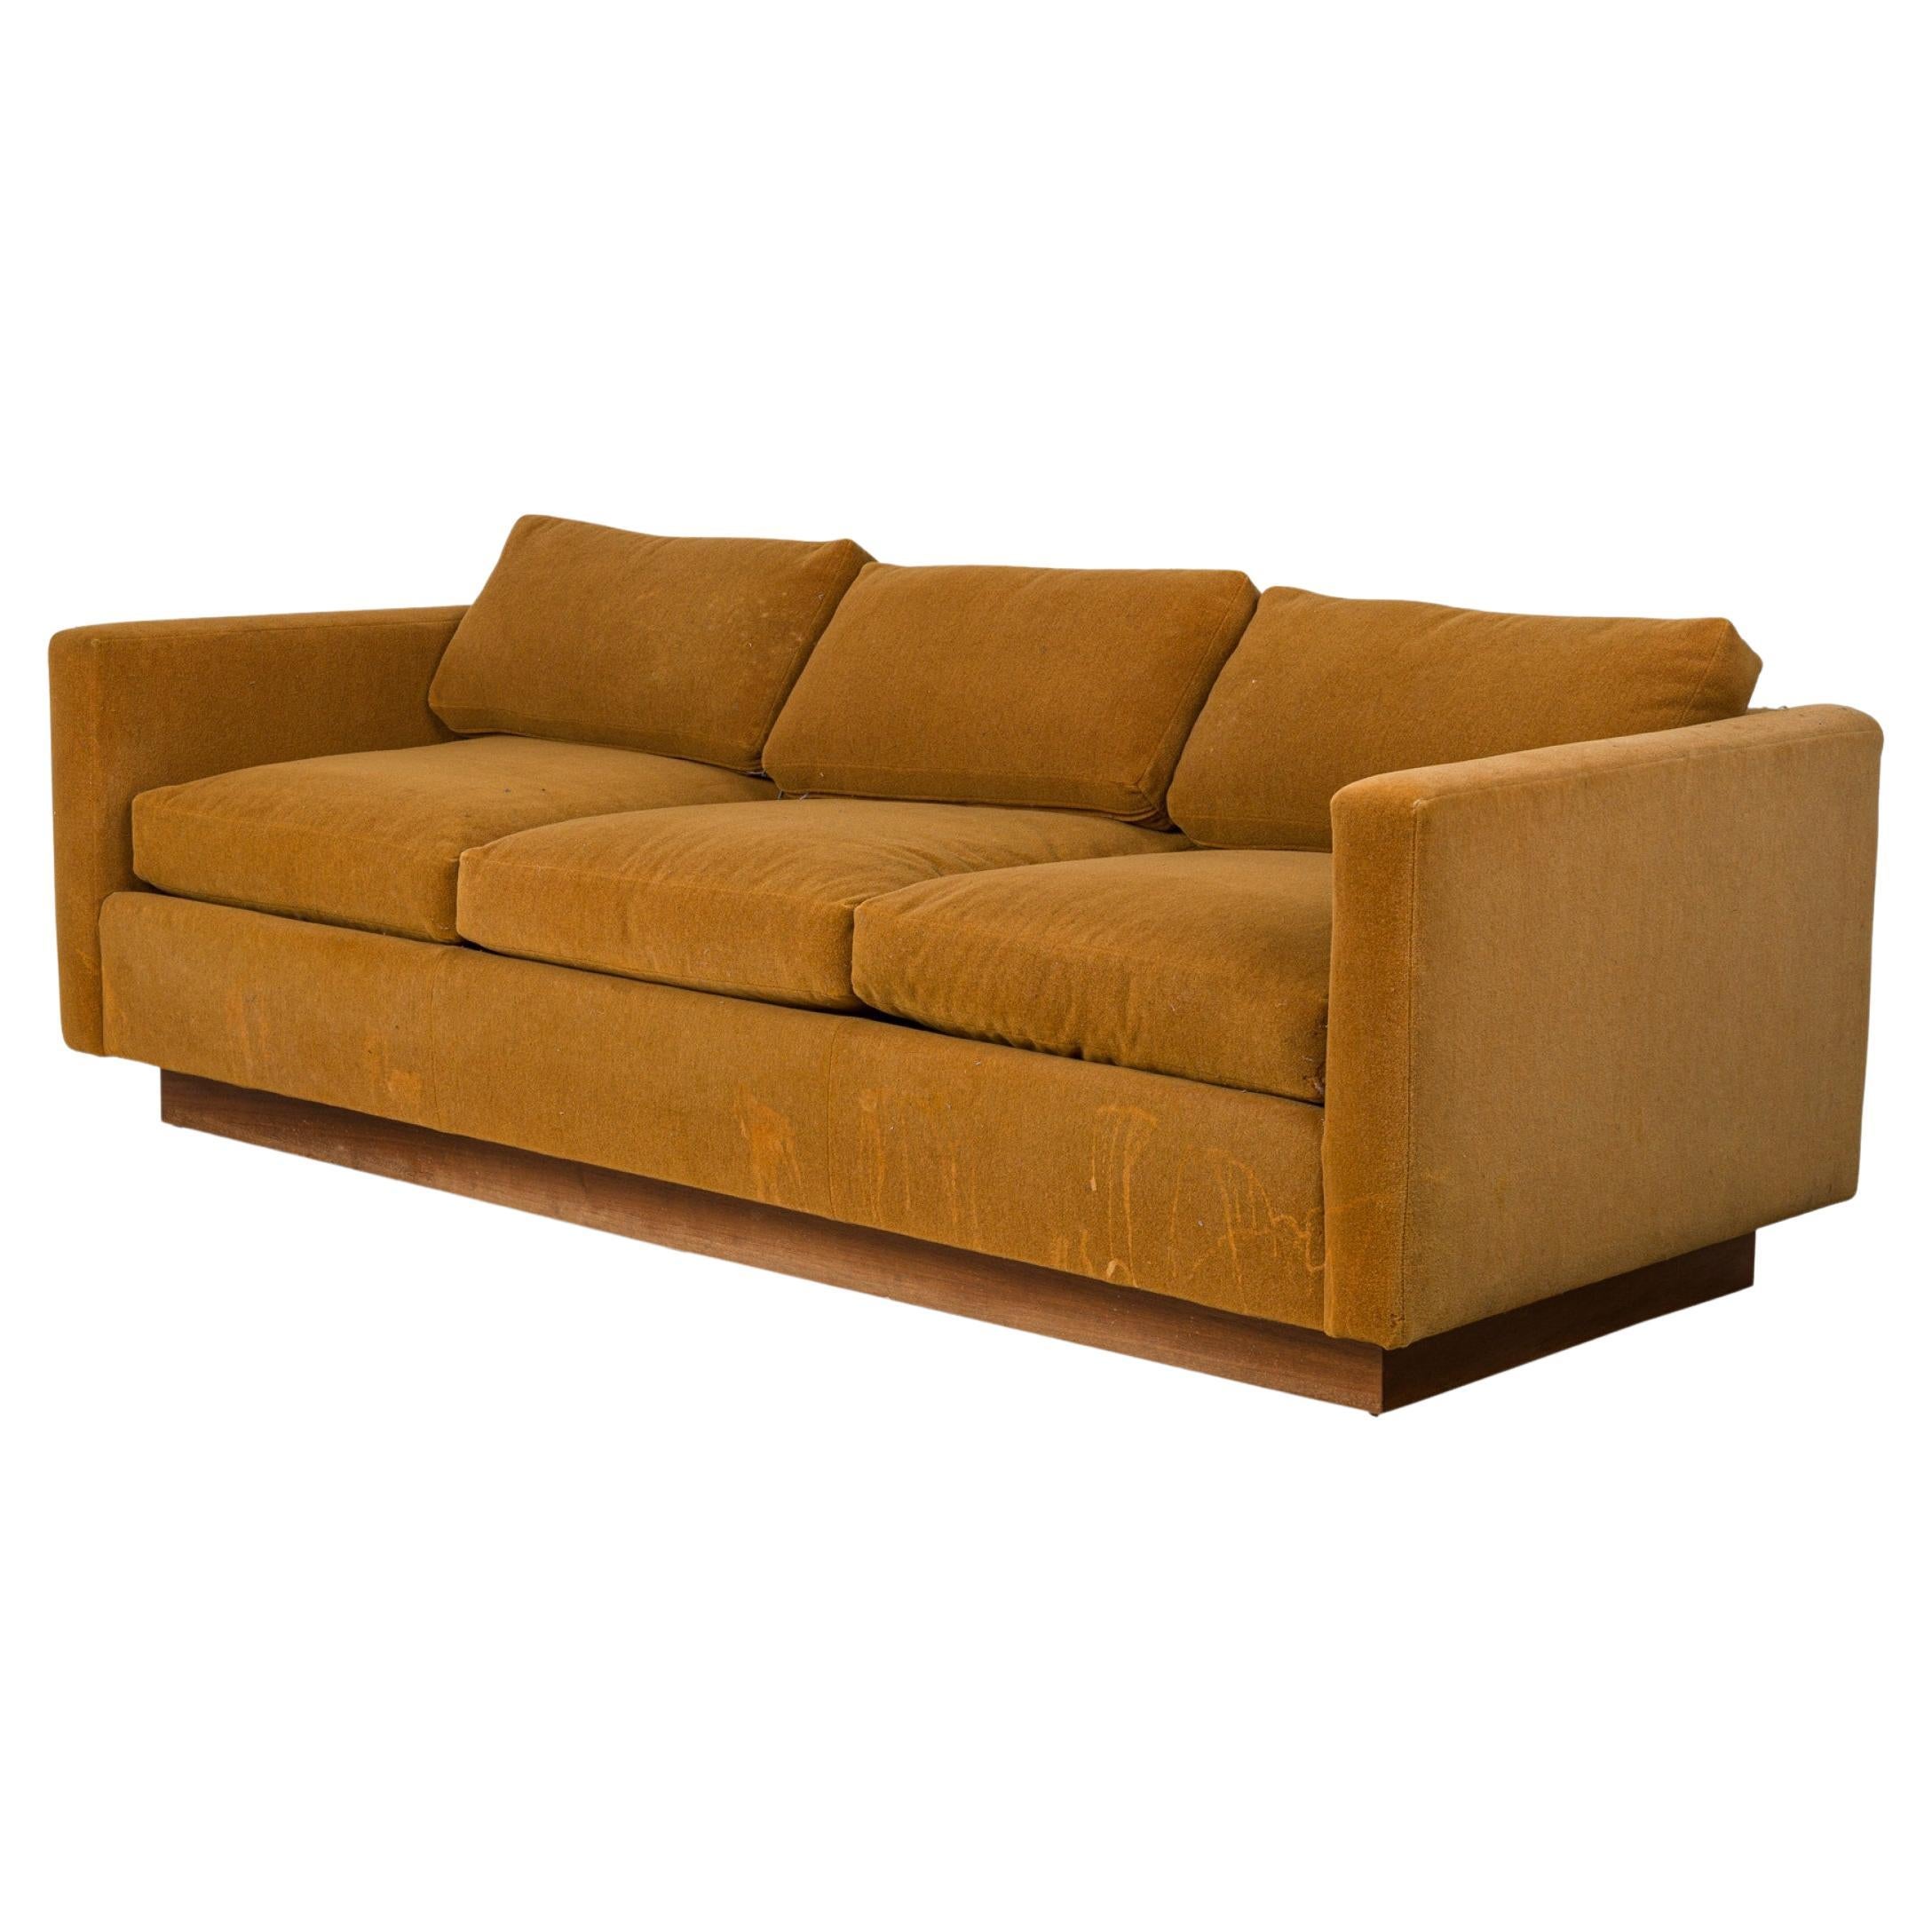 Milo Baughman Gold Fabric Upholstered Floating 'Tuxedo' Sofa For Sale